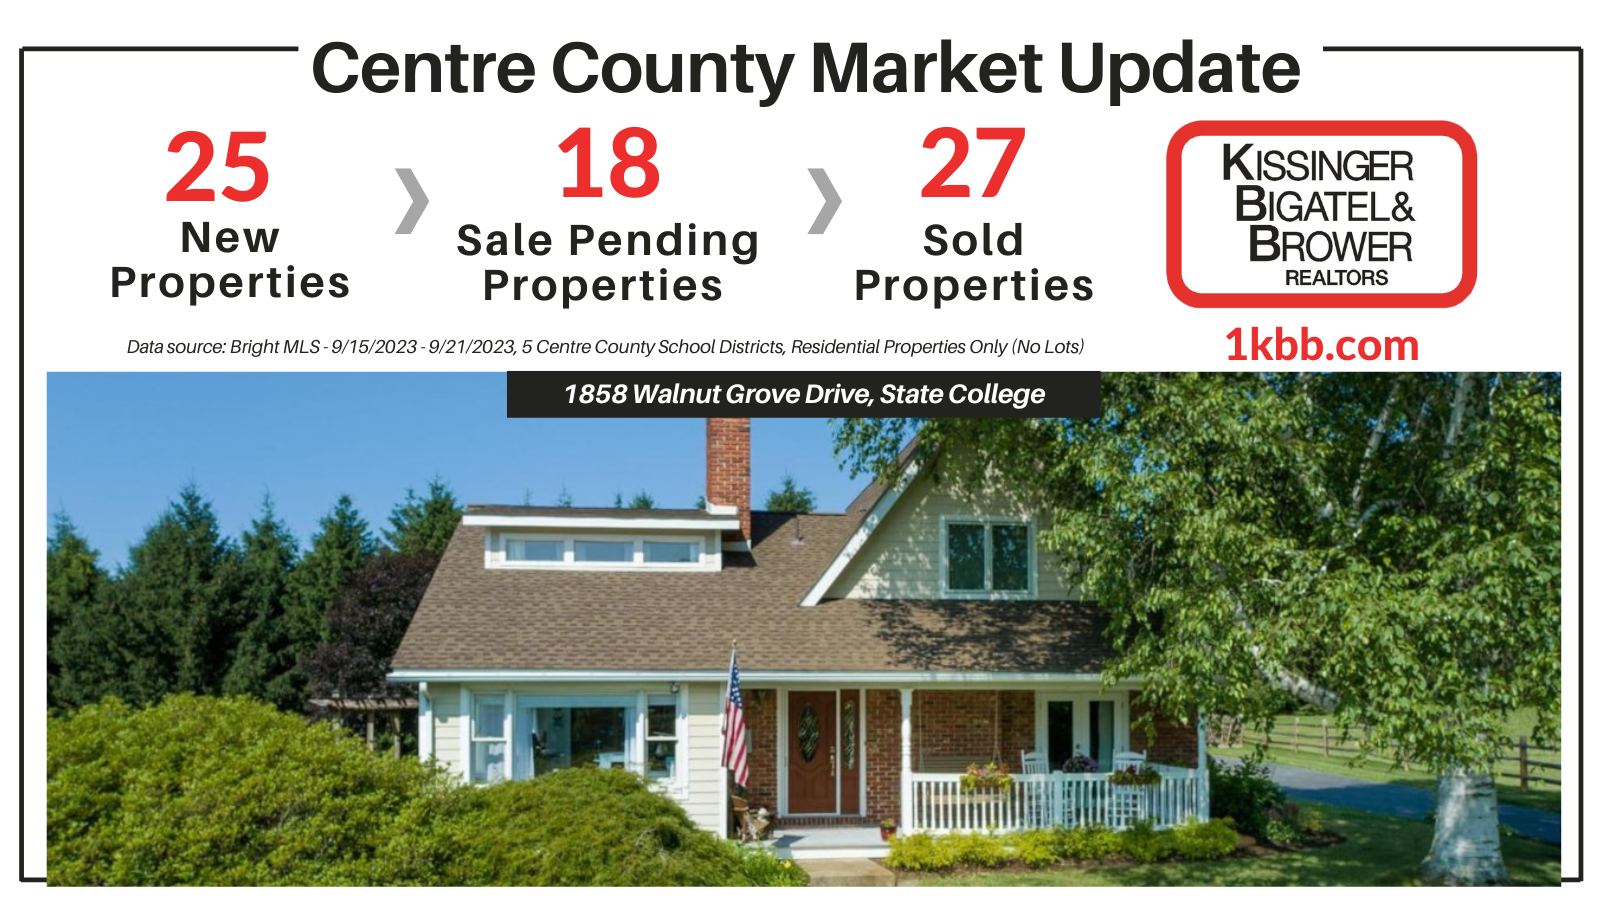 Market Update Report for 9/15/23-9/21/23 in Centre County, PA